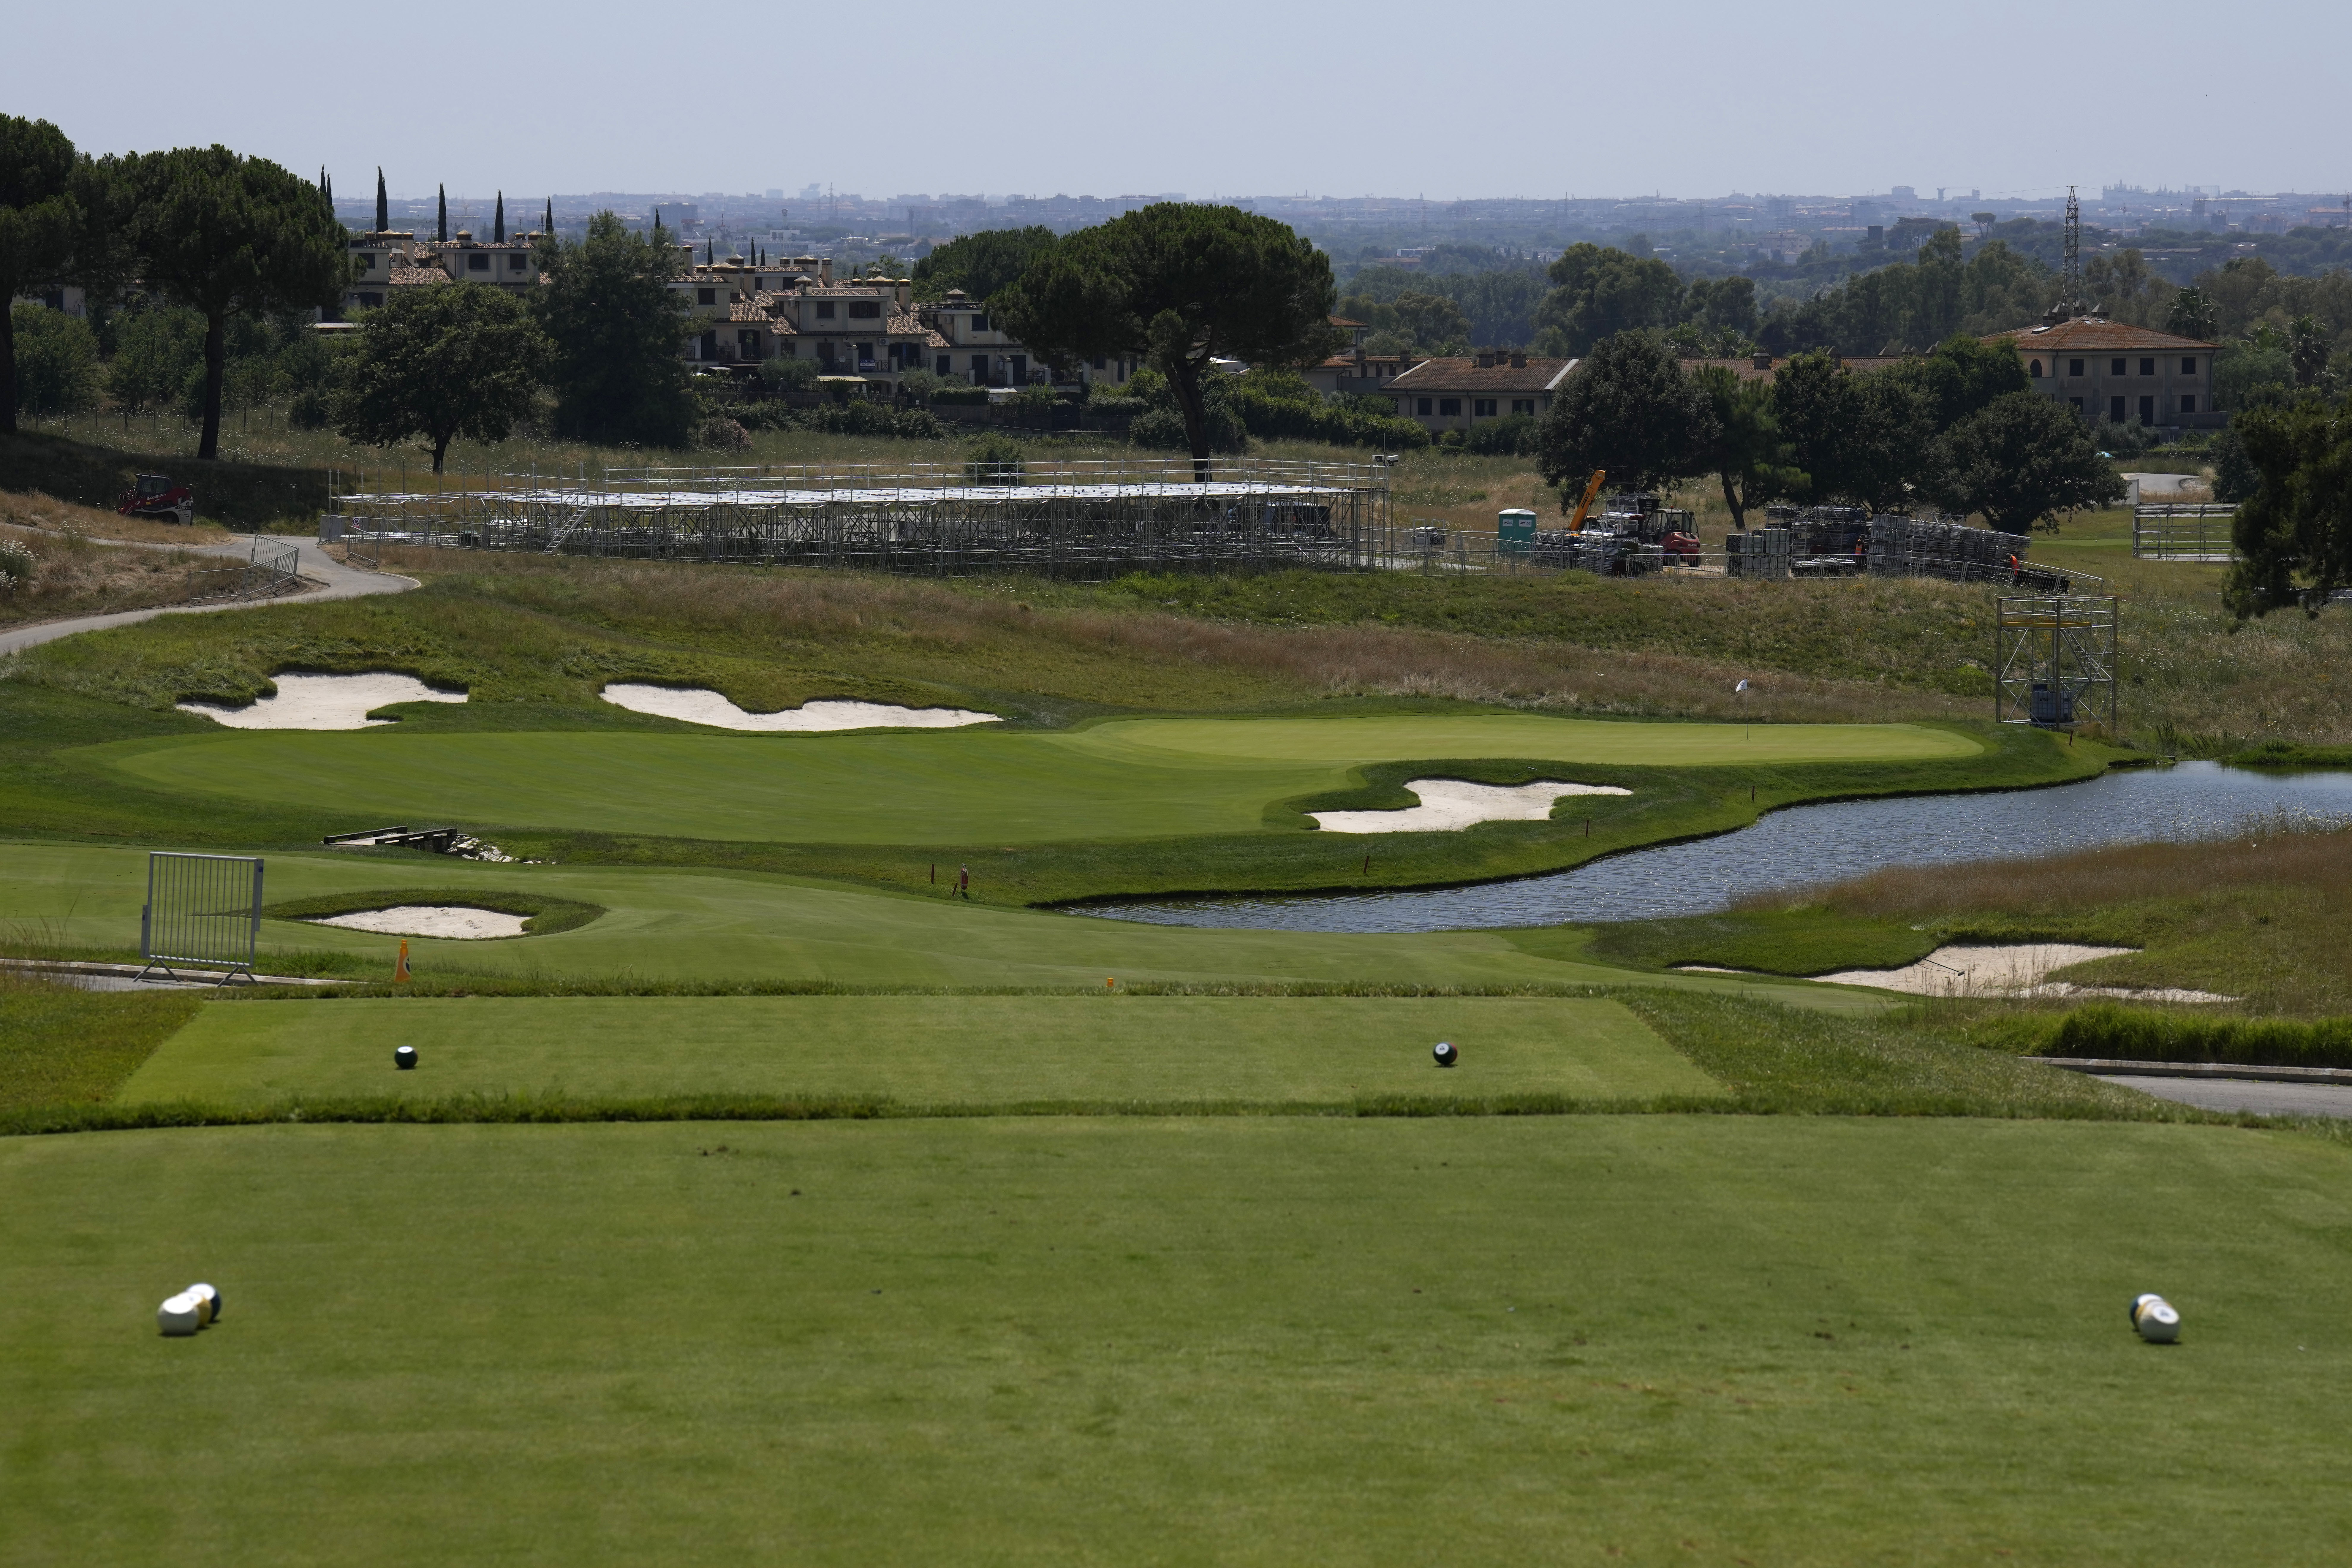 RYDER CUP '23: The reachable par-4 16th is the highlight on a course  designed for drama